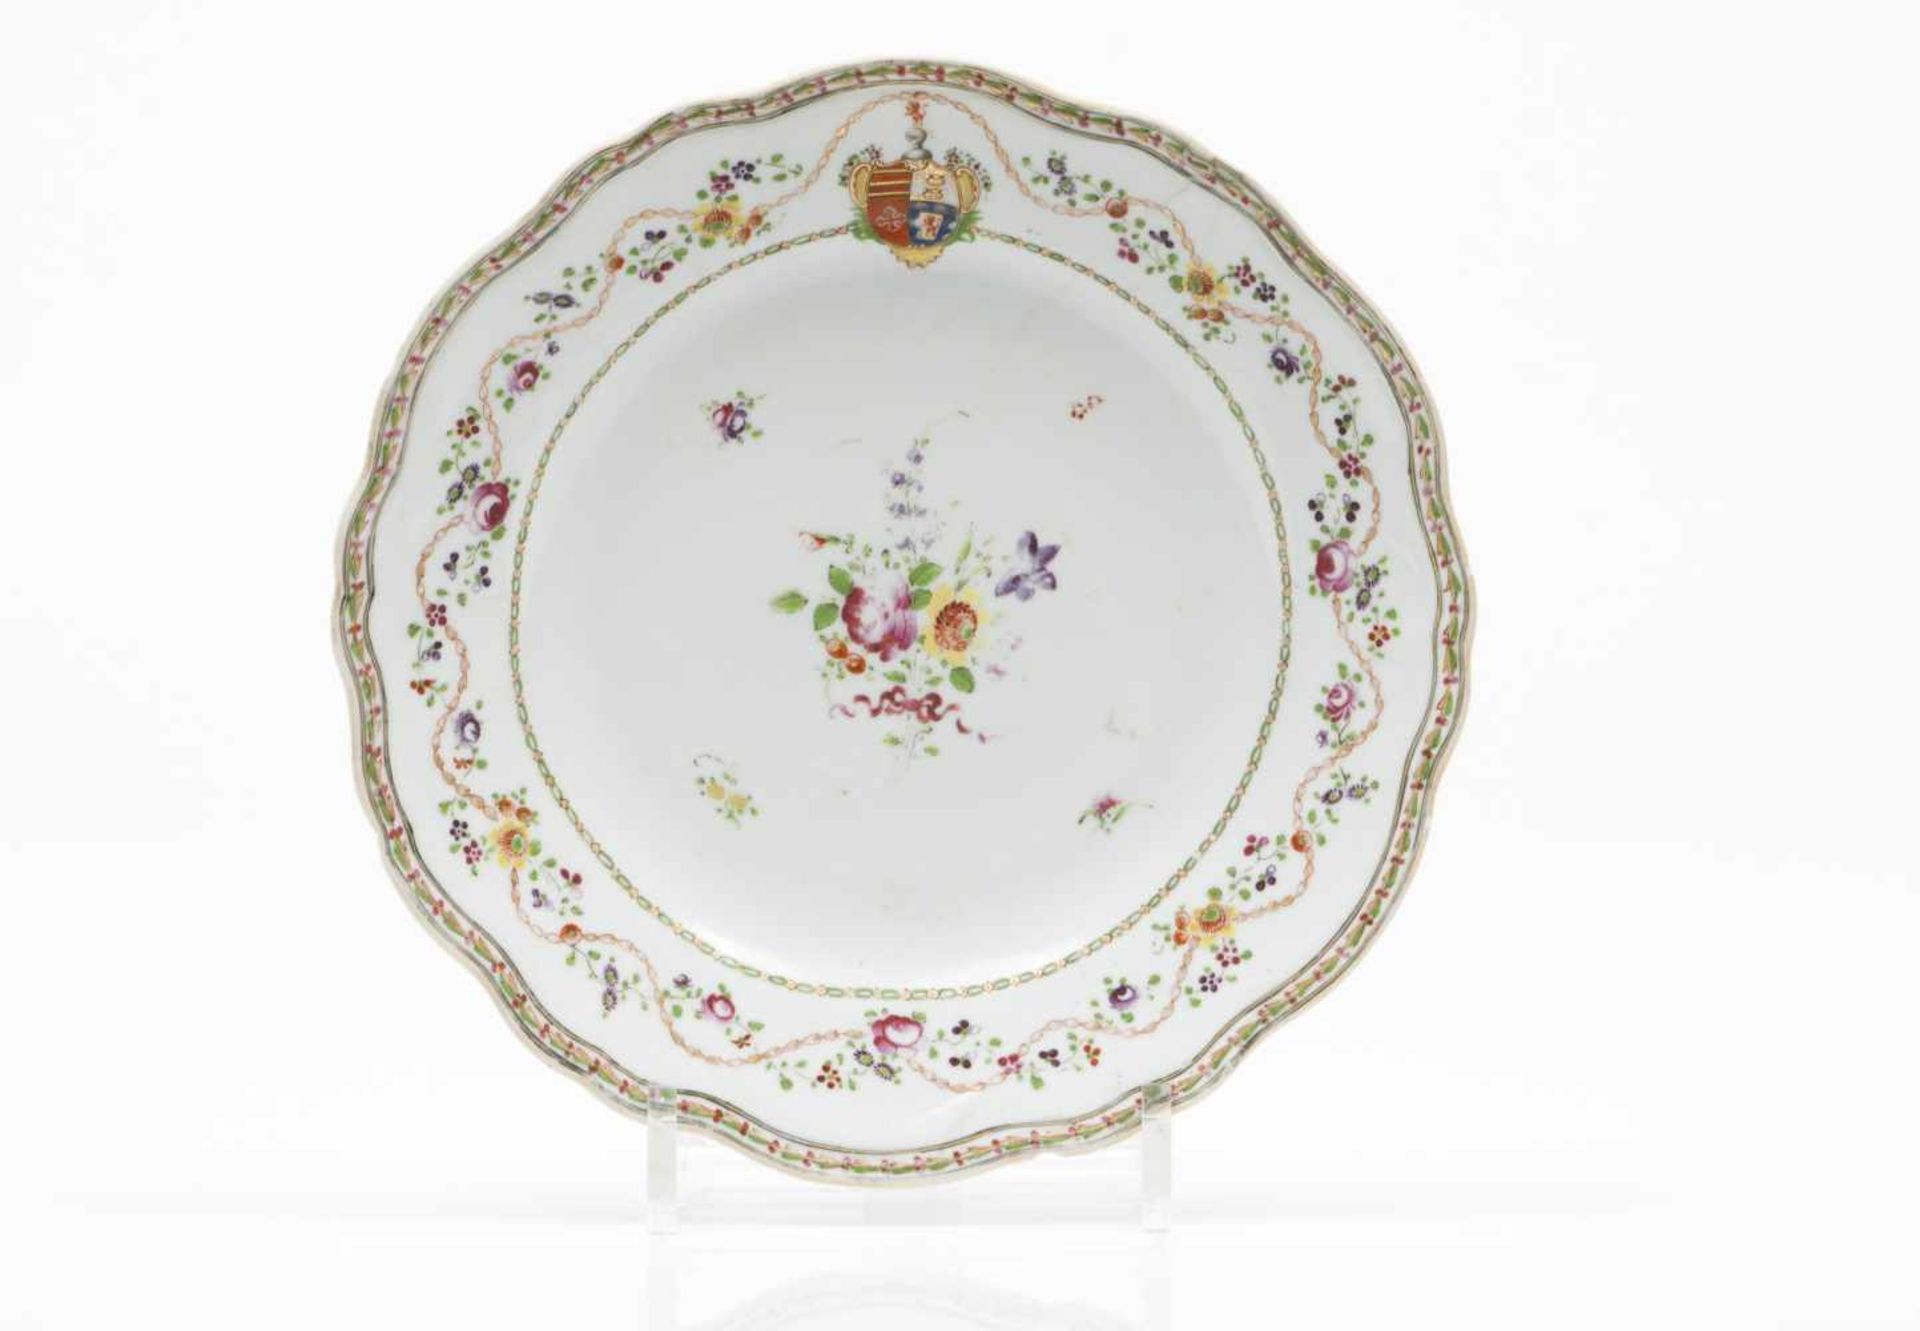 A scalloped plate